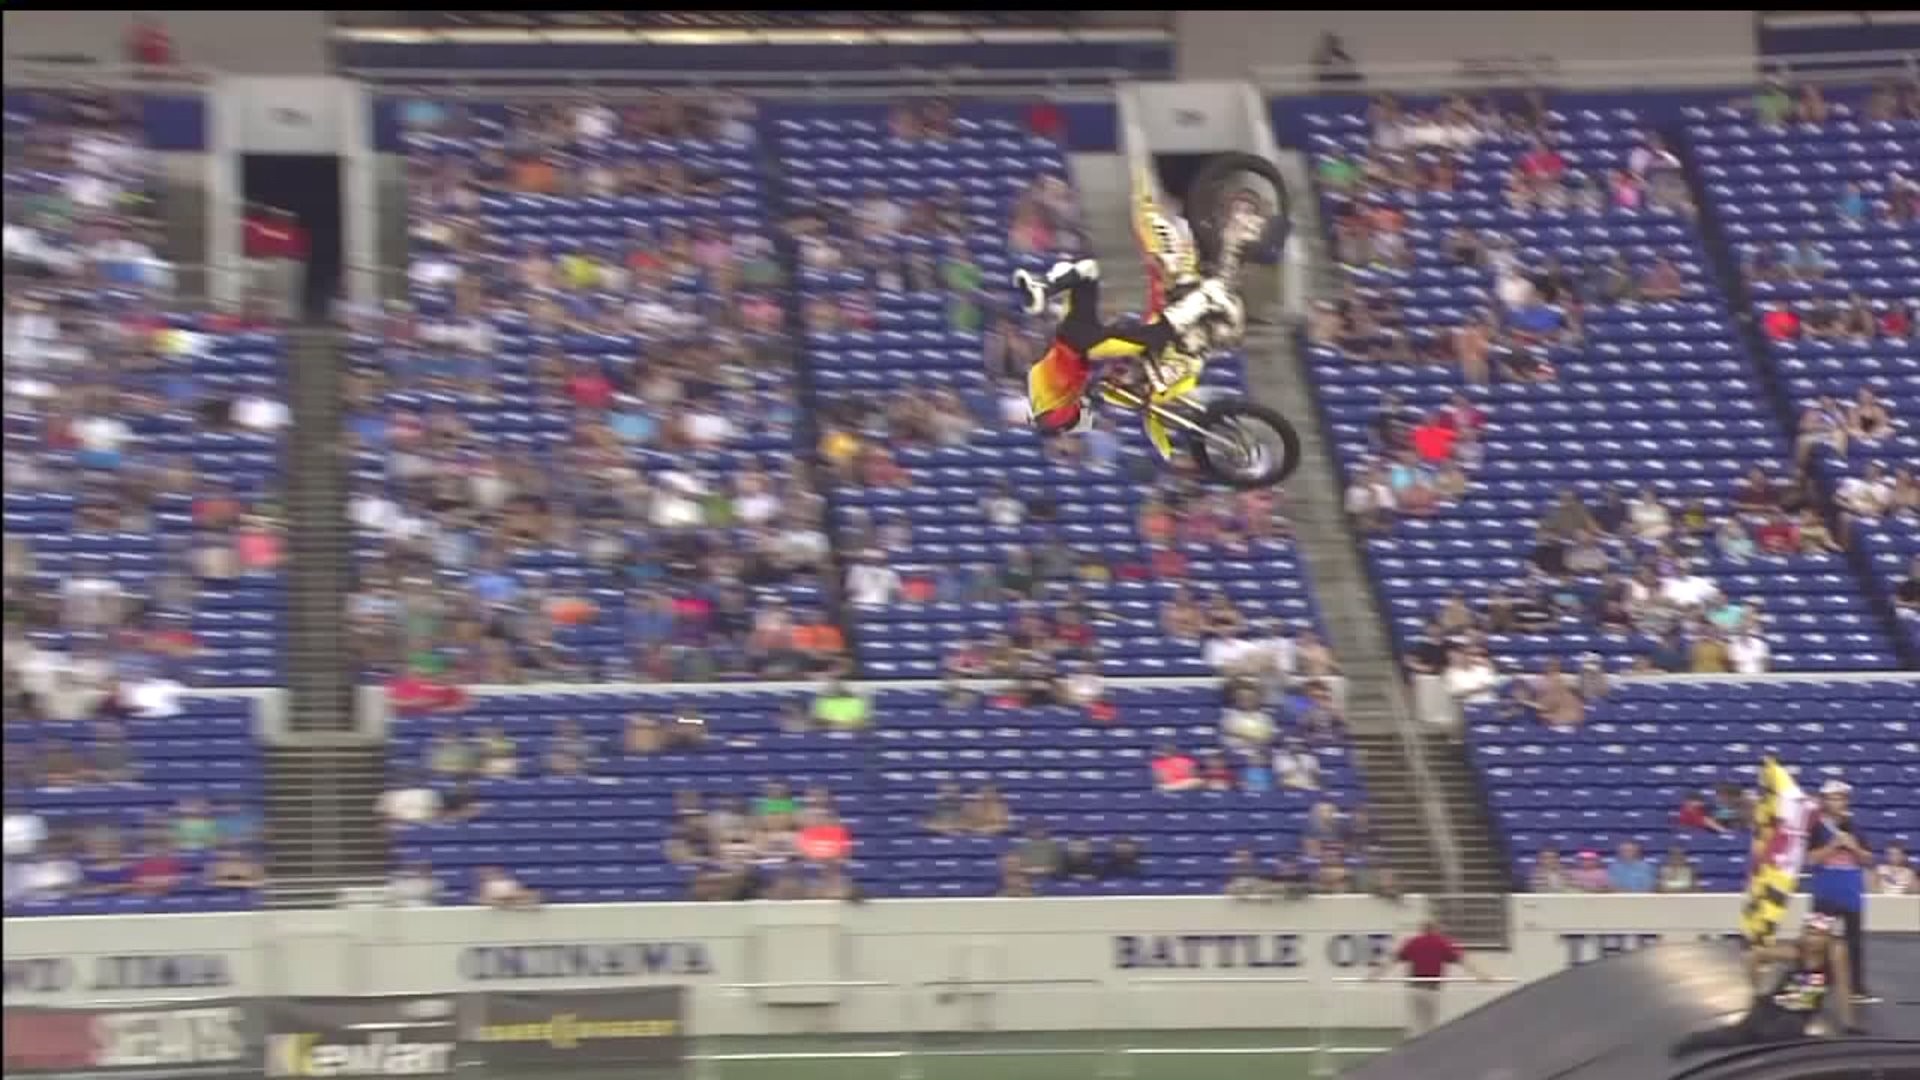 Nitro Circus "Next Level" tour coming to Peoplesbank Park on June 15